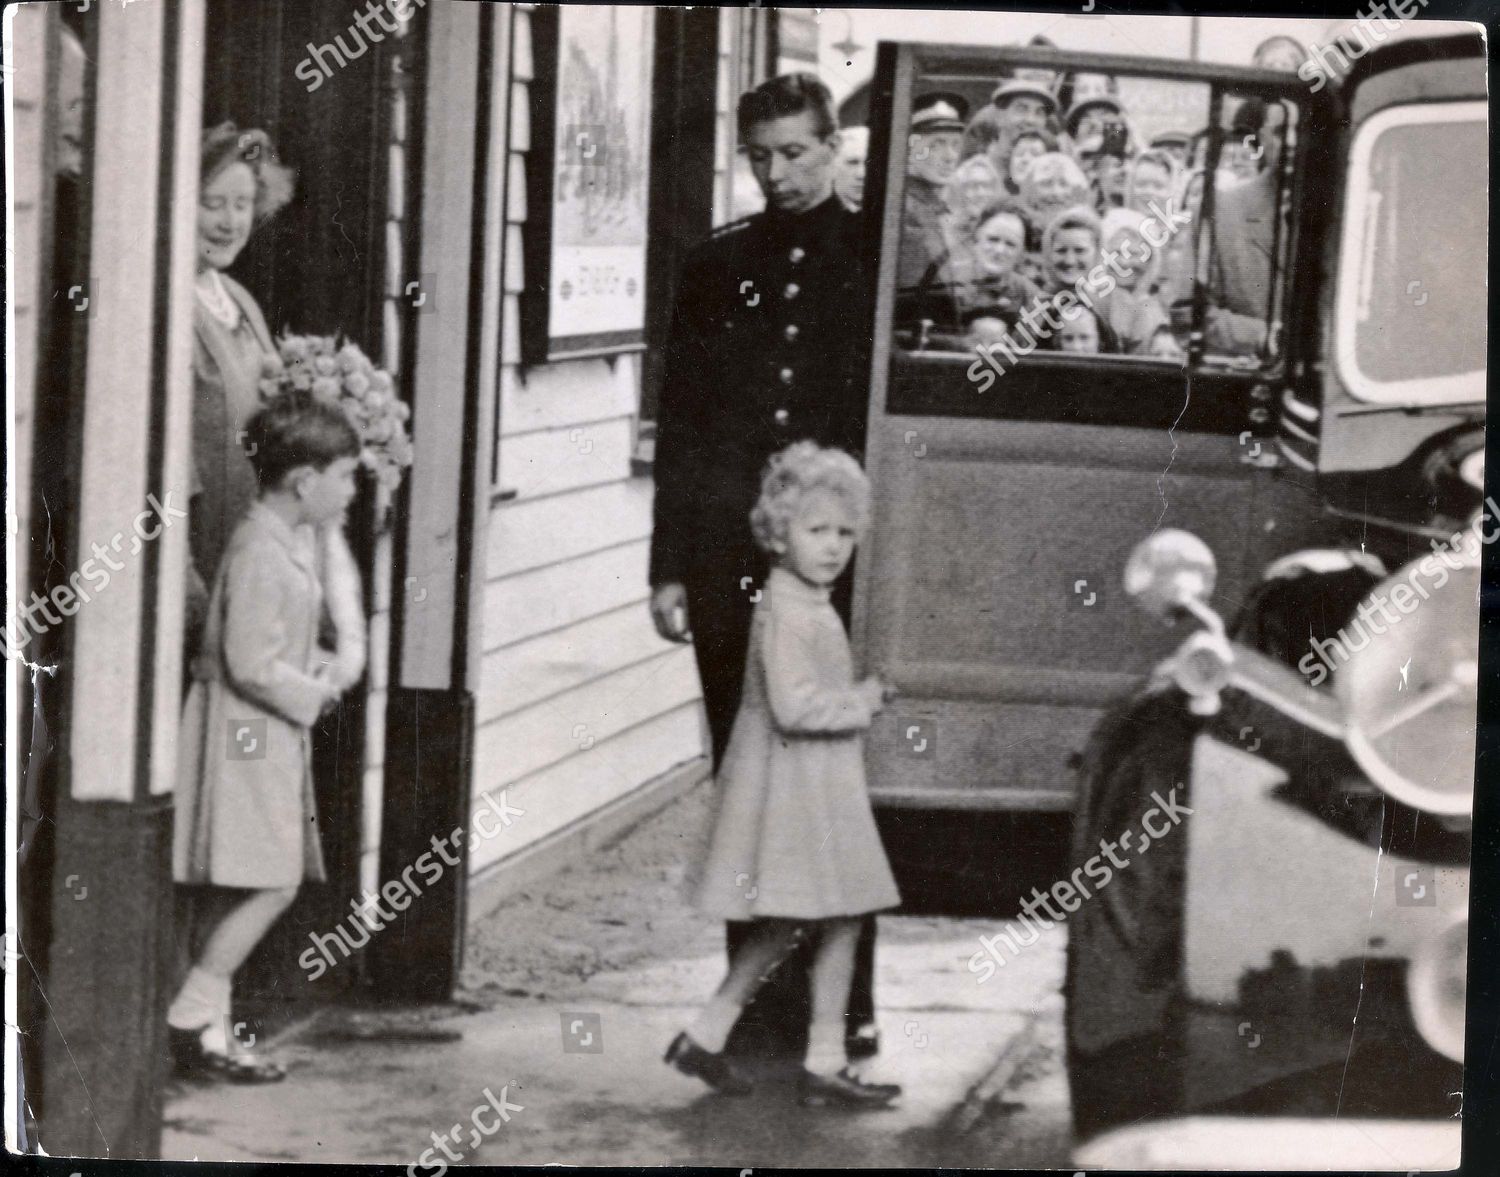 princess-anne-august-1954-eagerly-smiling-women-some-of-whom-had-waited-for-hours-get-a-brief-glimpse-of-prince-charles-and-princess-anne-as-they-walk-sedately-to-their-car-at-ballater-station-yesterday-with-the-queen-mother-they-had-travelled-ove-shutterstock-editorial-884977a.jpg